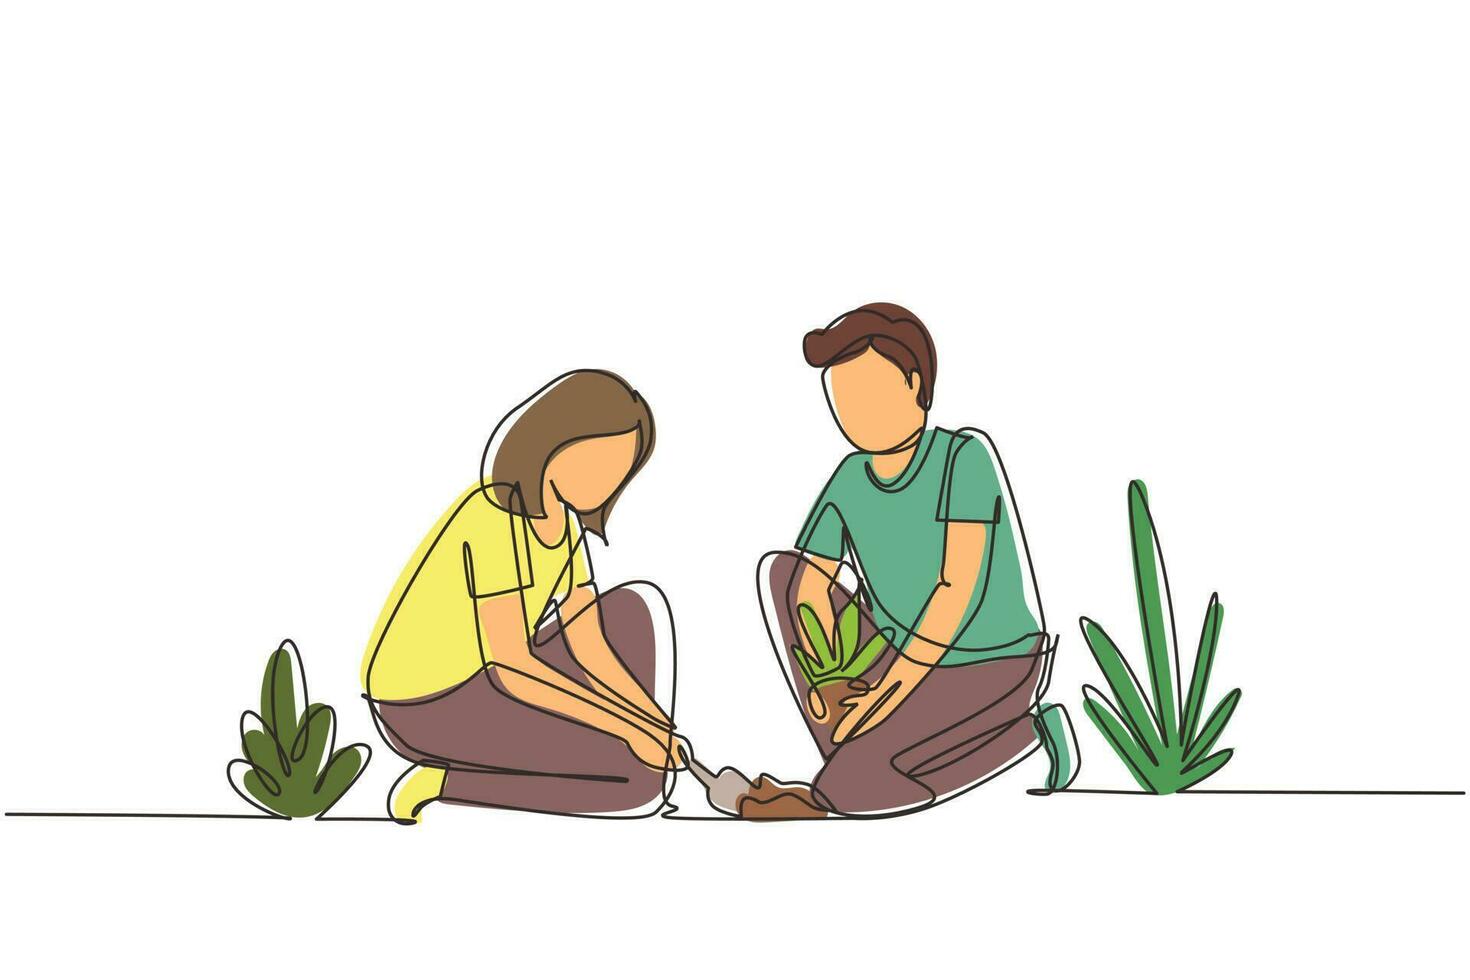 Single one line drawing young man woman are planting tree. Gardening, garden tools, spring, stalk. Couple plants seedling. Girl helps man plant young tree. Continuous line draw design graphic vector